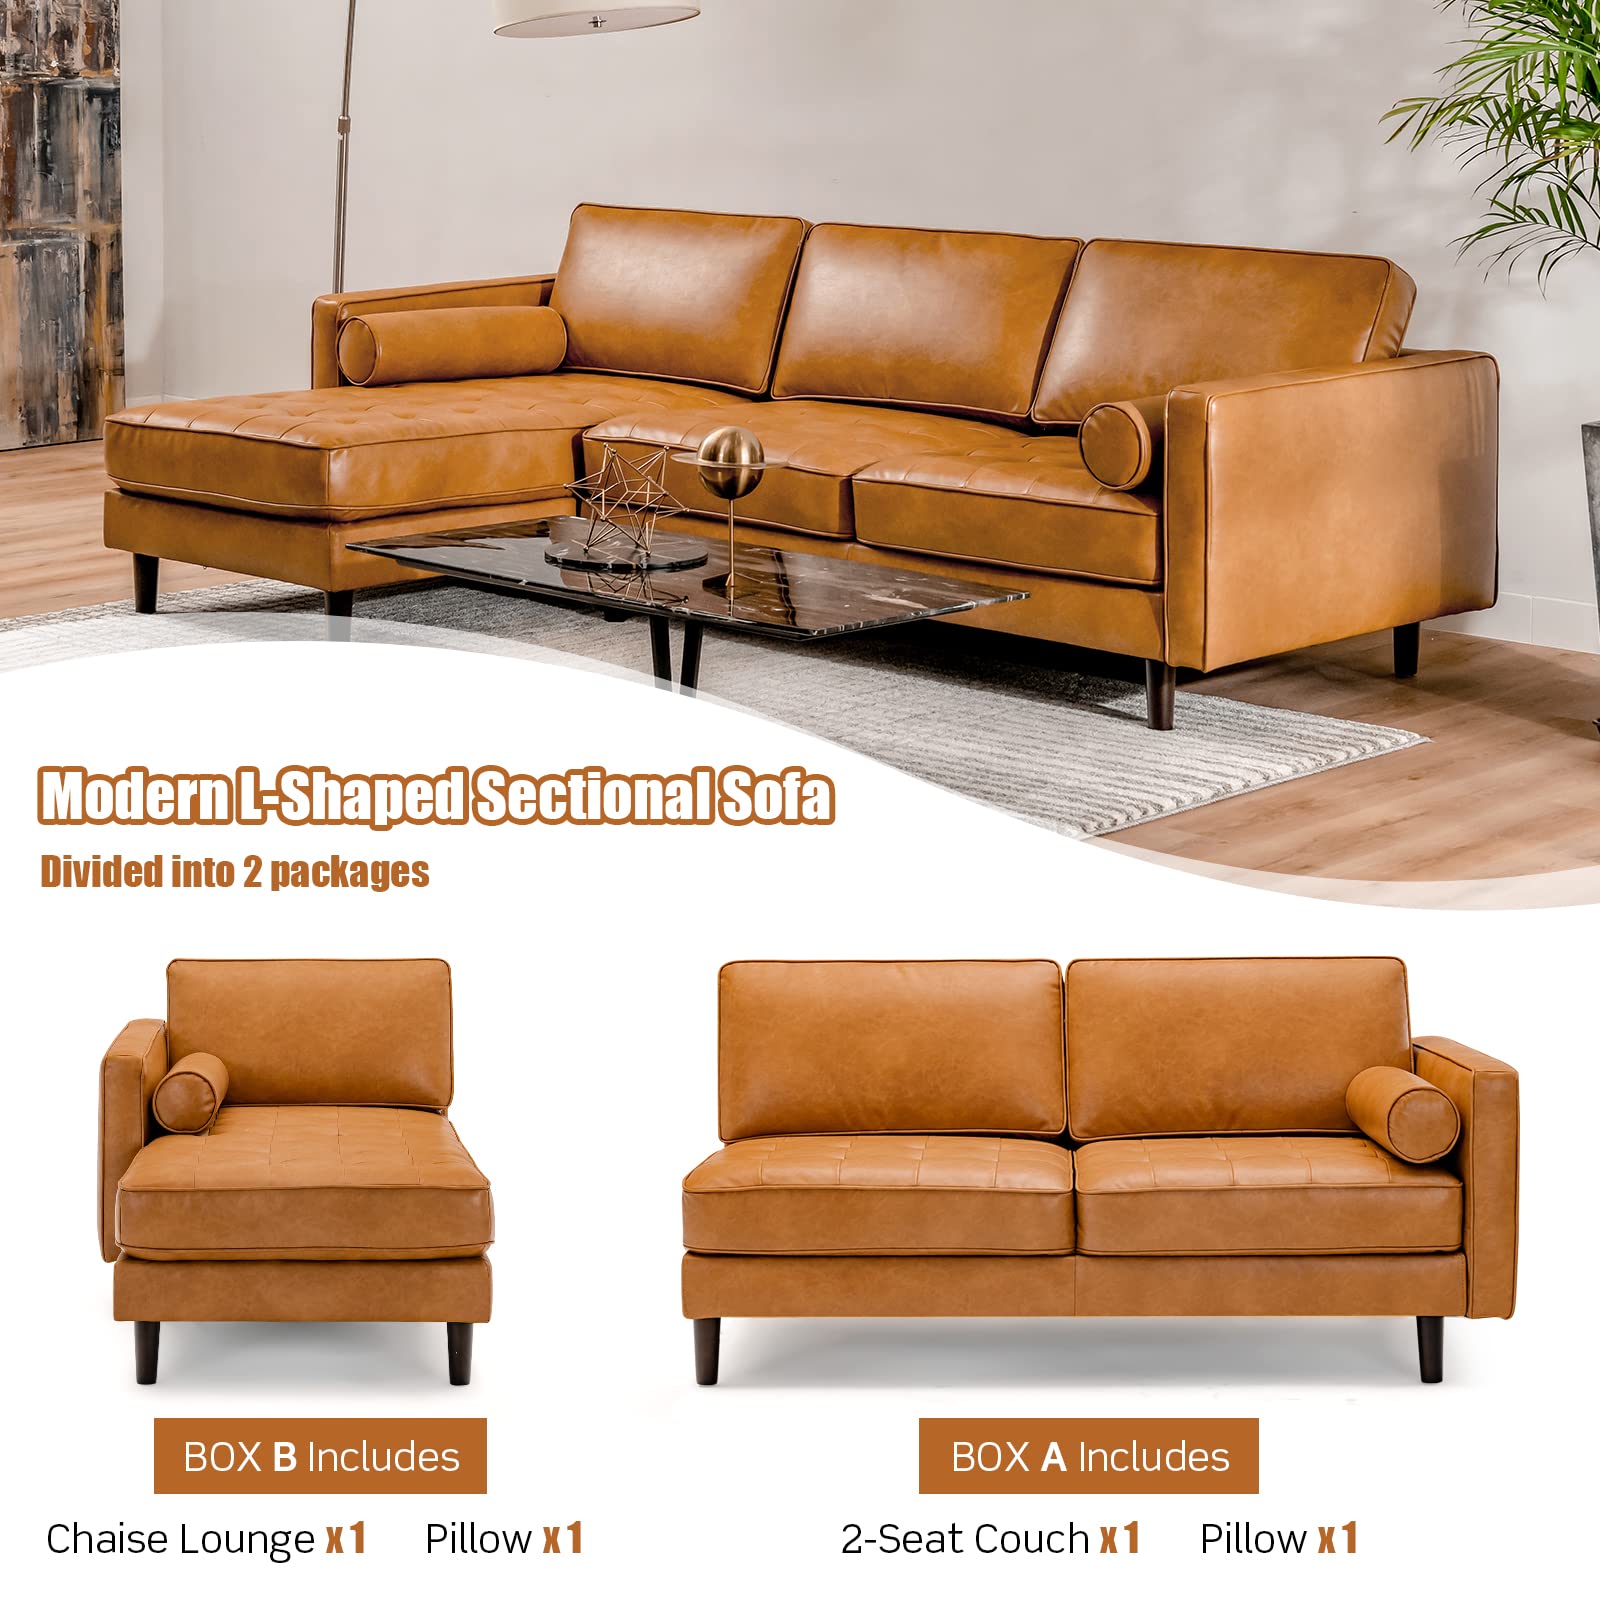 Giantex Sectional Sofa Couch with Chaise Lounge, L-Shaped 3-Seat Sofa Sleeper